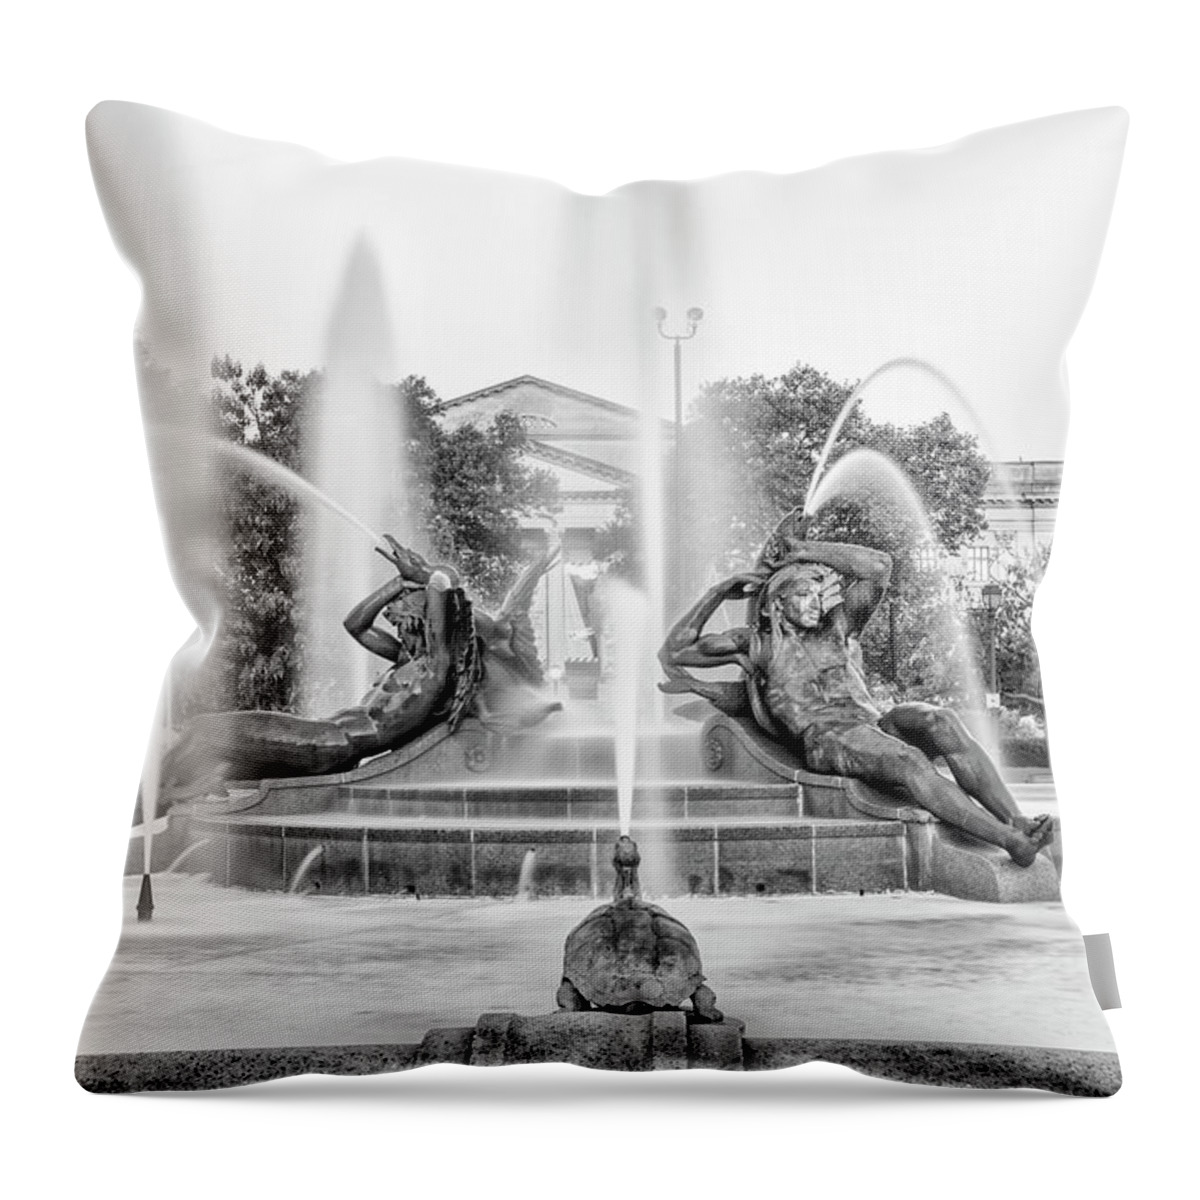 Black And White Swann Throw Pillow featuring the photograph Swann Fountain - Philadephia on the Parkway in Black and White by Philadelphia Photography